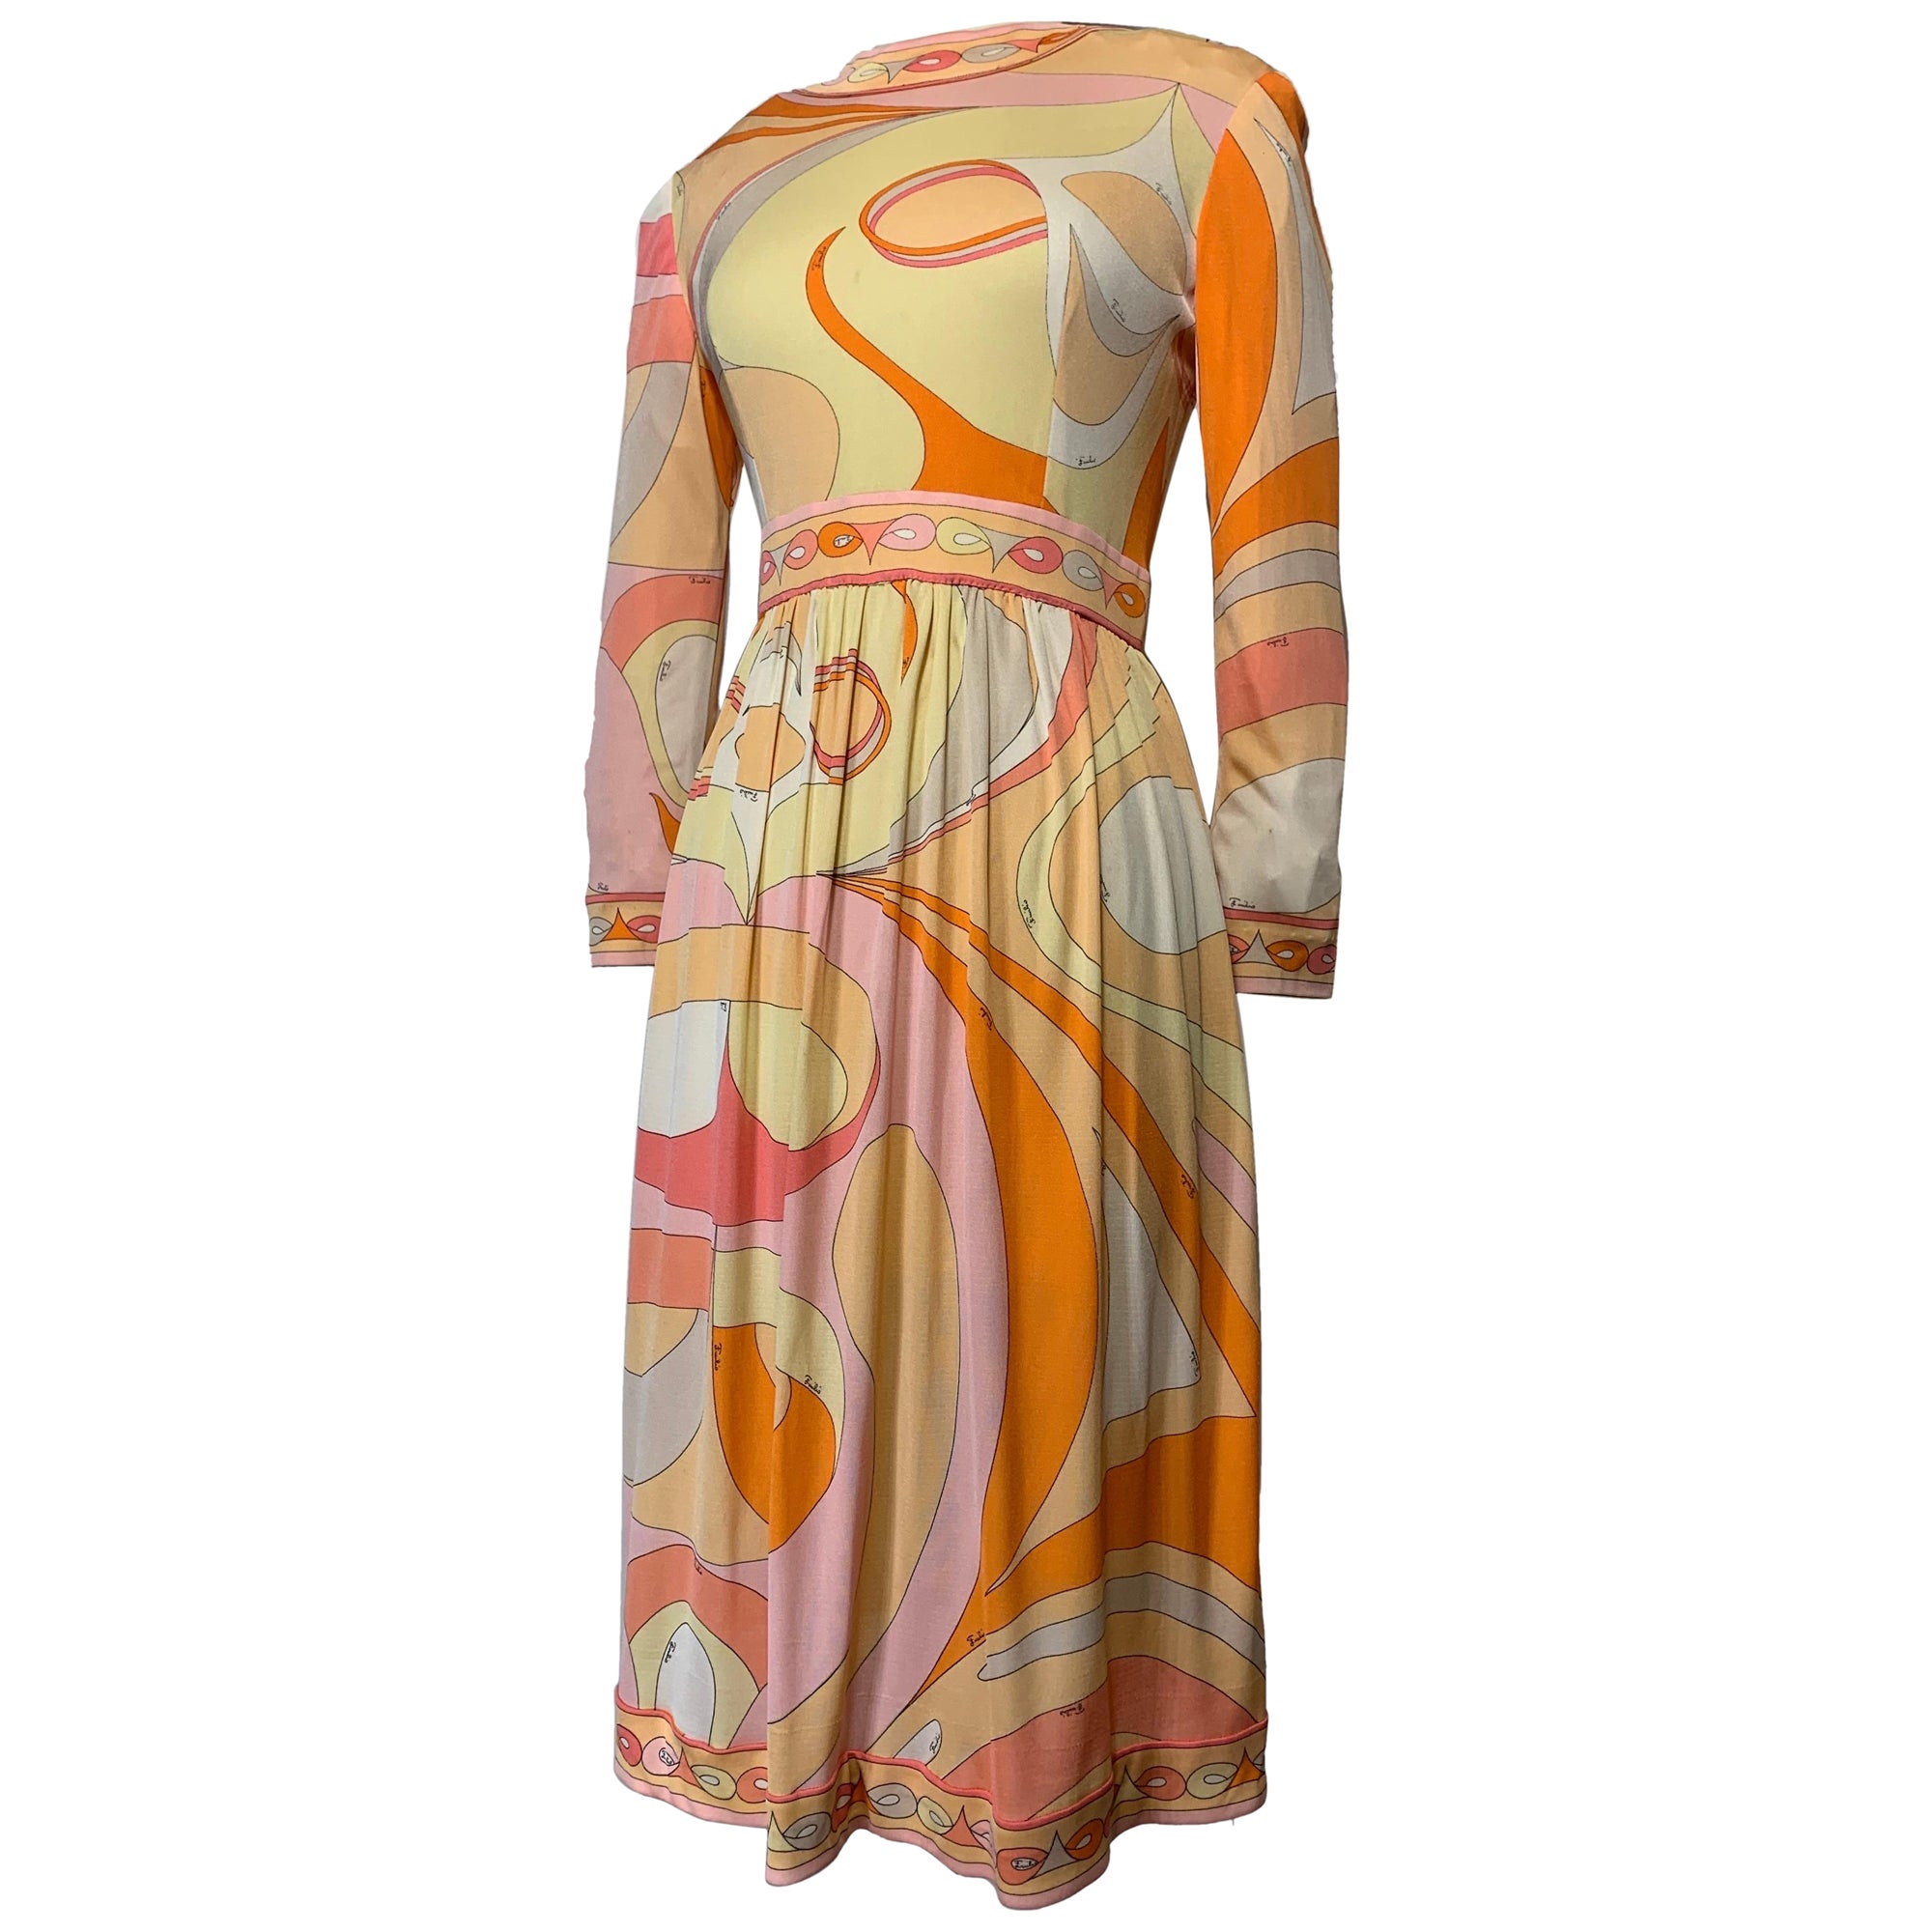 1960s Emilio Pucci Psychedelic Print Mod Day Dress w Full Skirt in Tangerine  For Sale